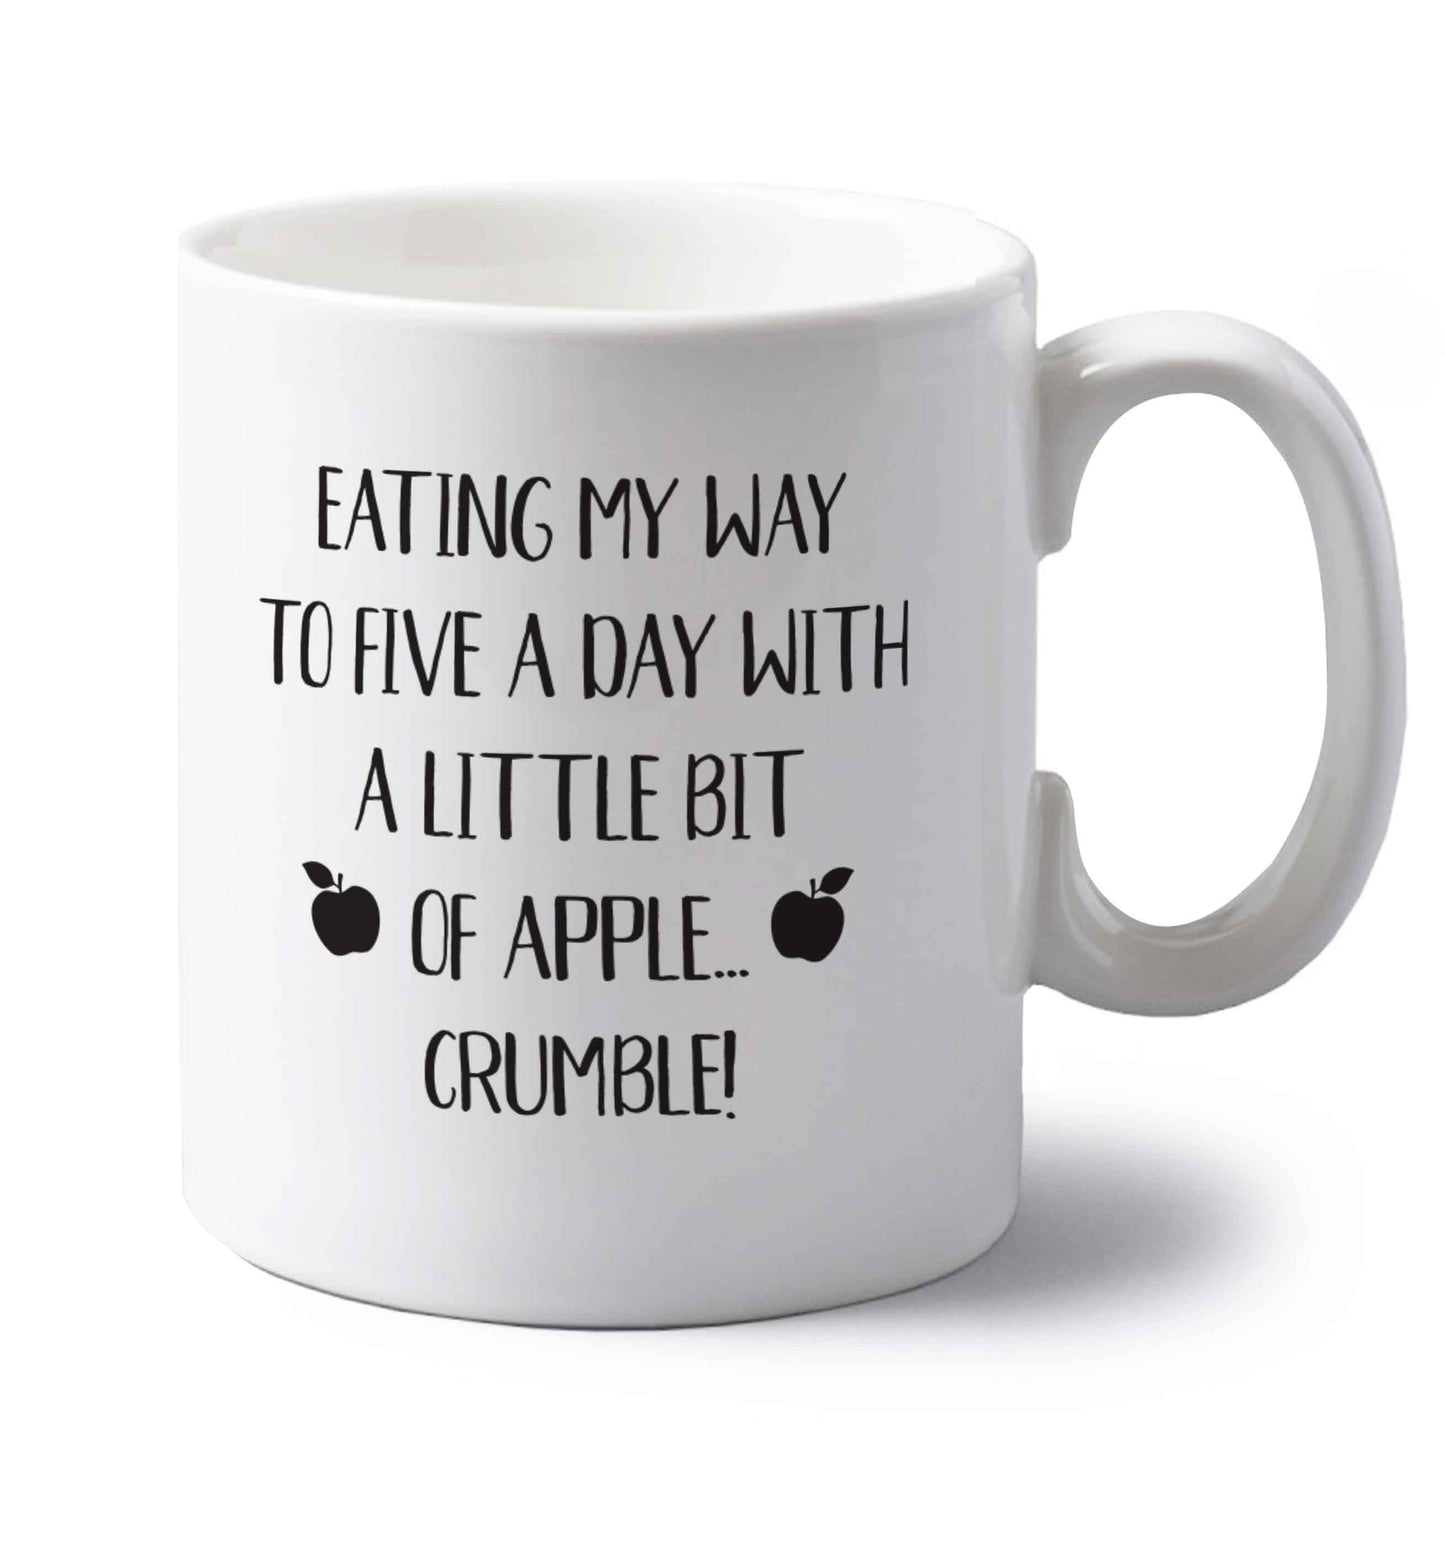 Eating my way to five a day with a little bit of apple crumble left handed white ceramic mug 